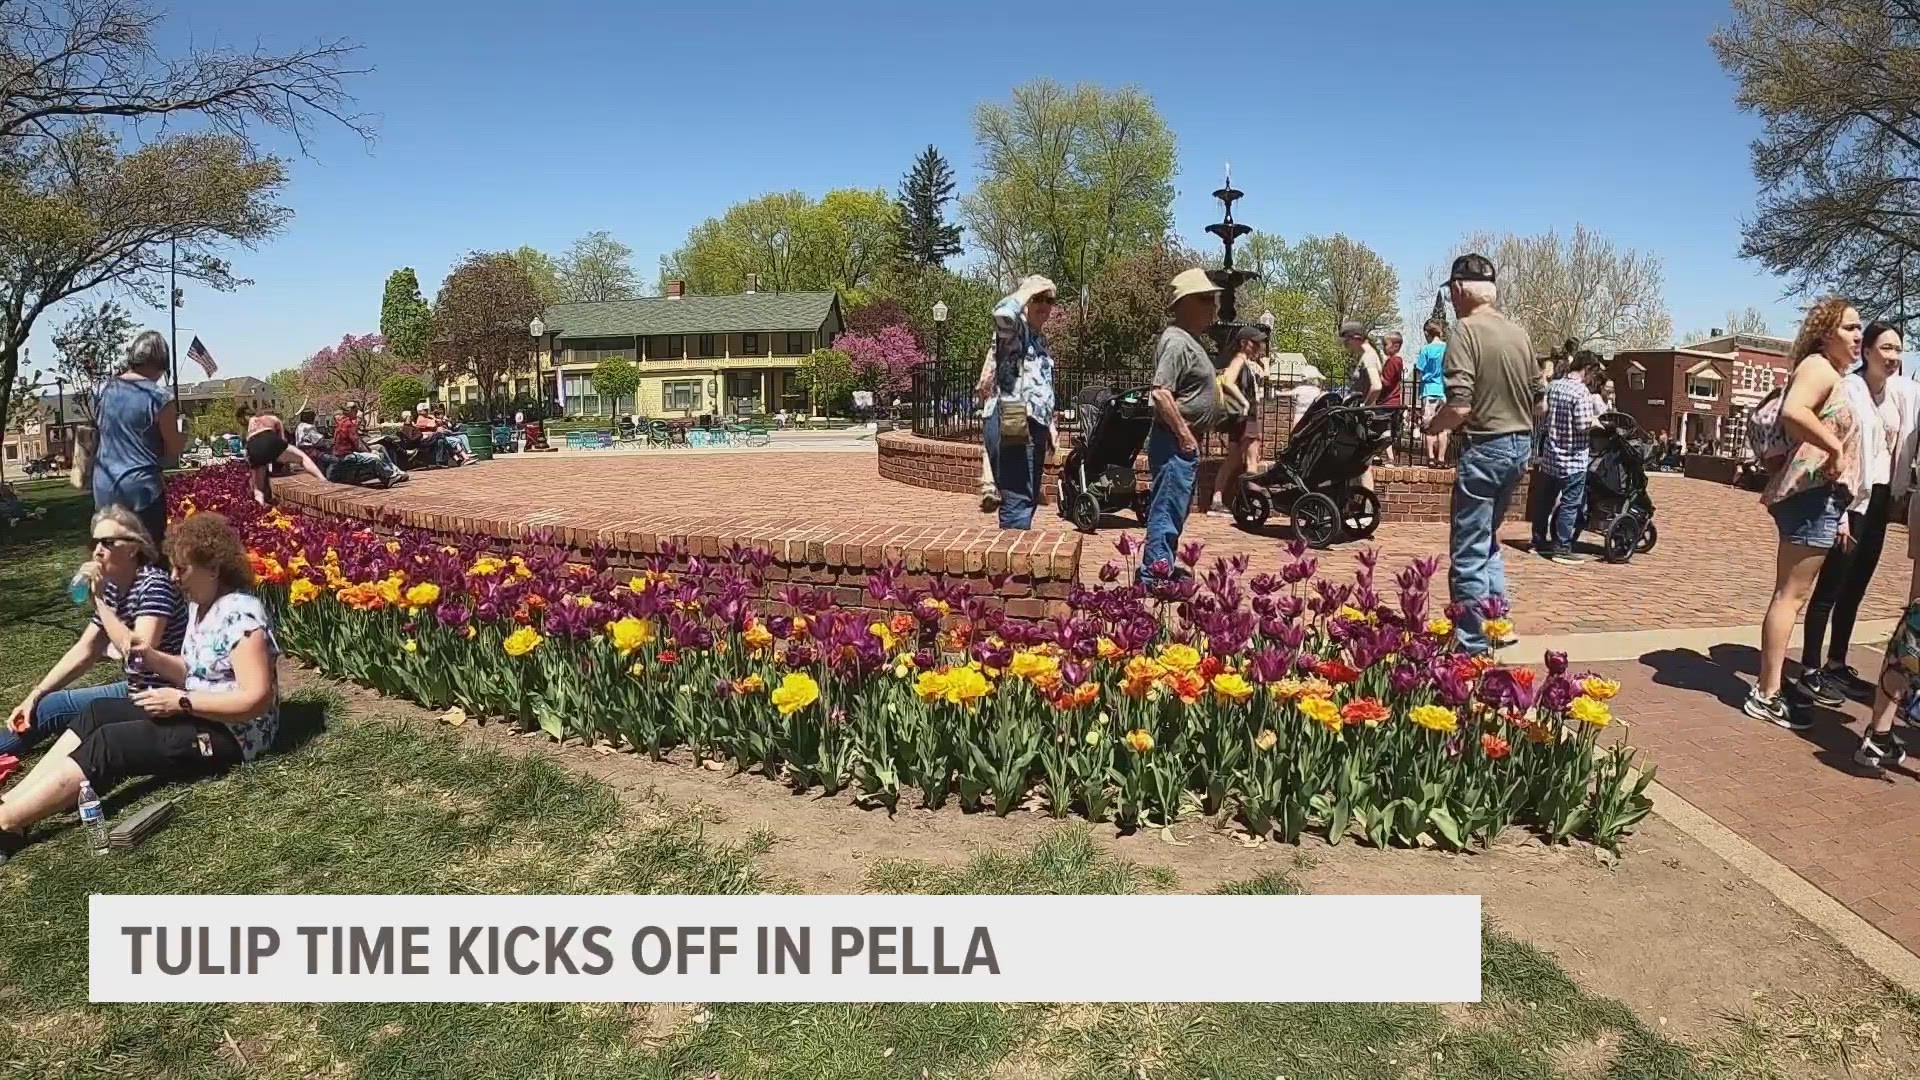 From the beautiful flowers to delicious food, here's what you can expect at Tulip Time in Pella.